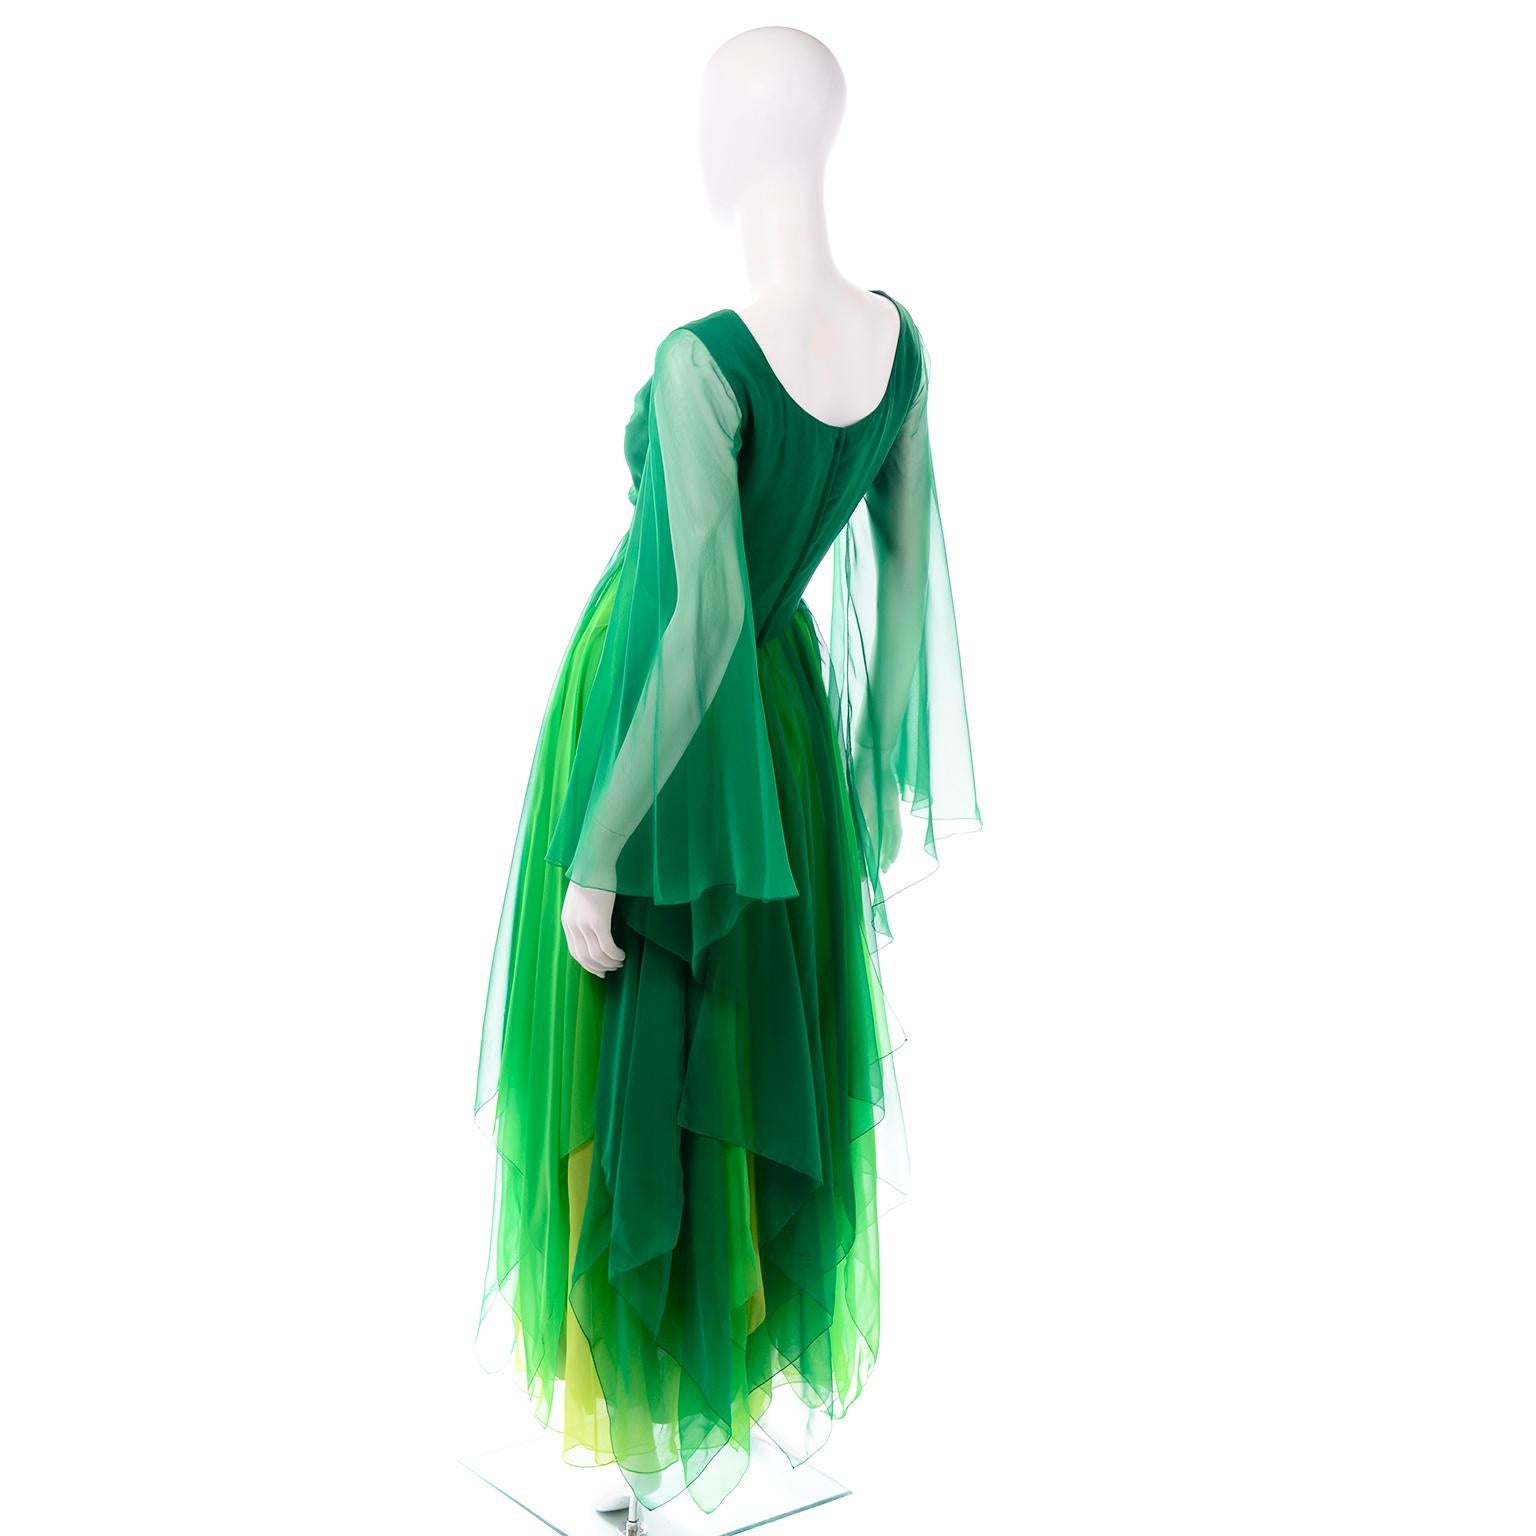 Vintage Layered Flowing Evening Dress in Multi Shades of Green Silk Chiffon  In Excellent Condition For Sale In Portland, OR